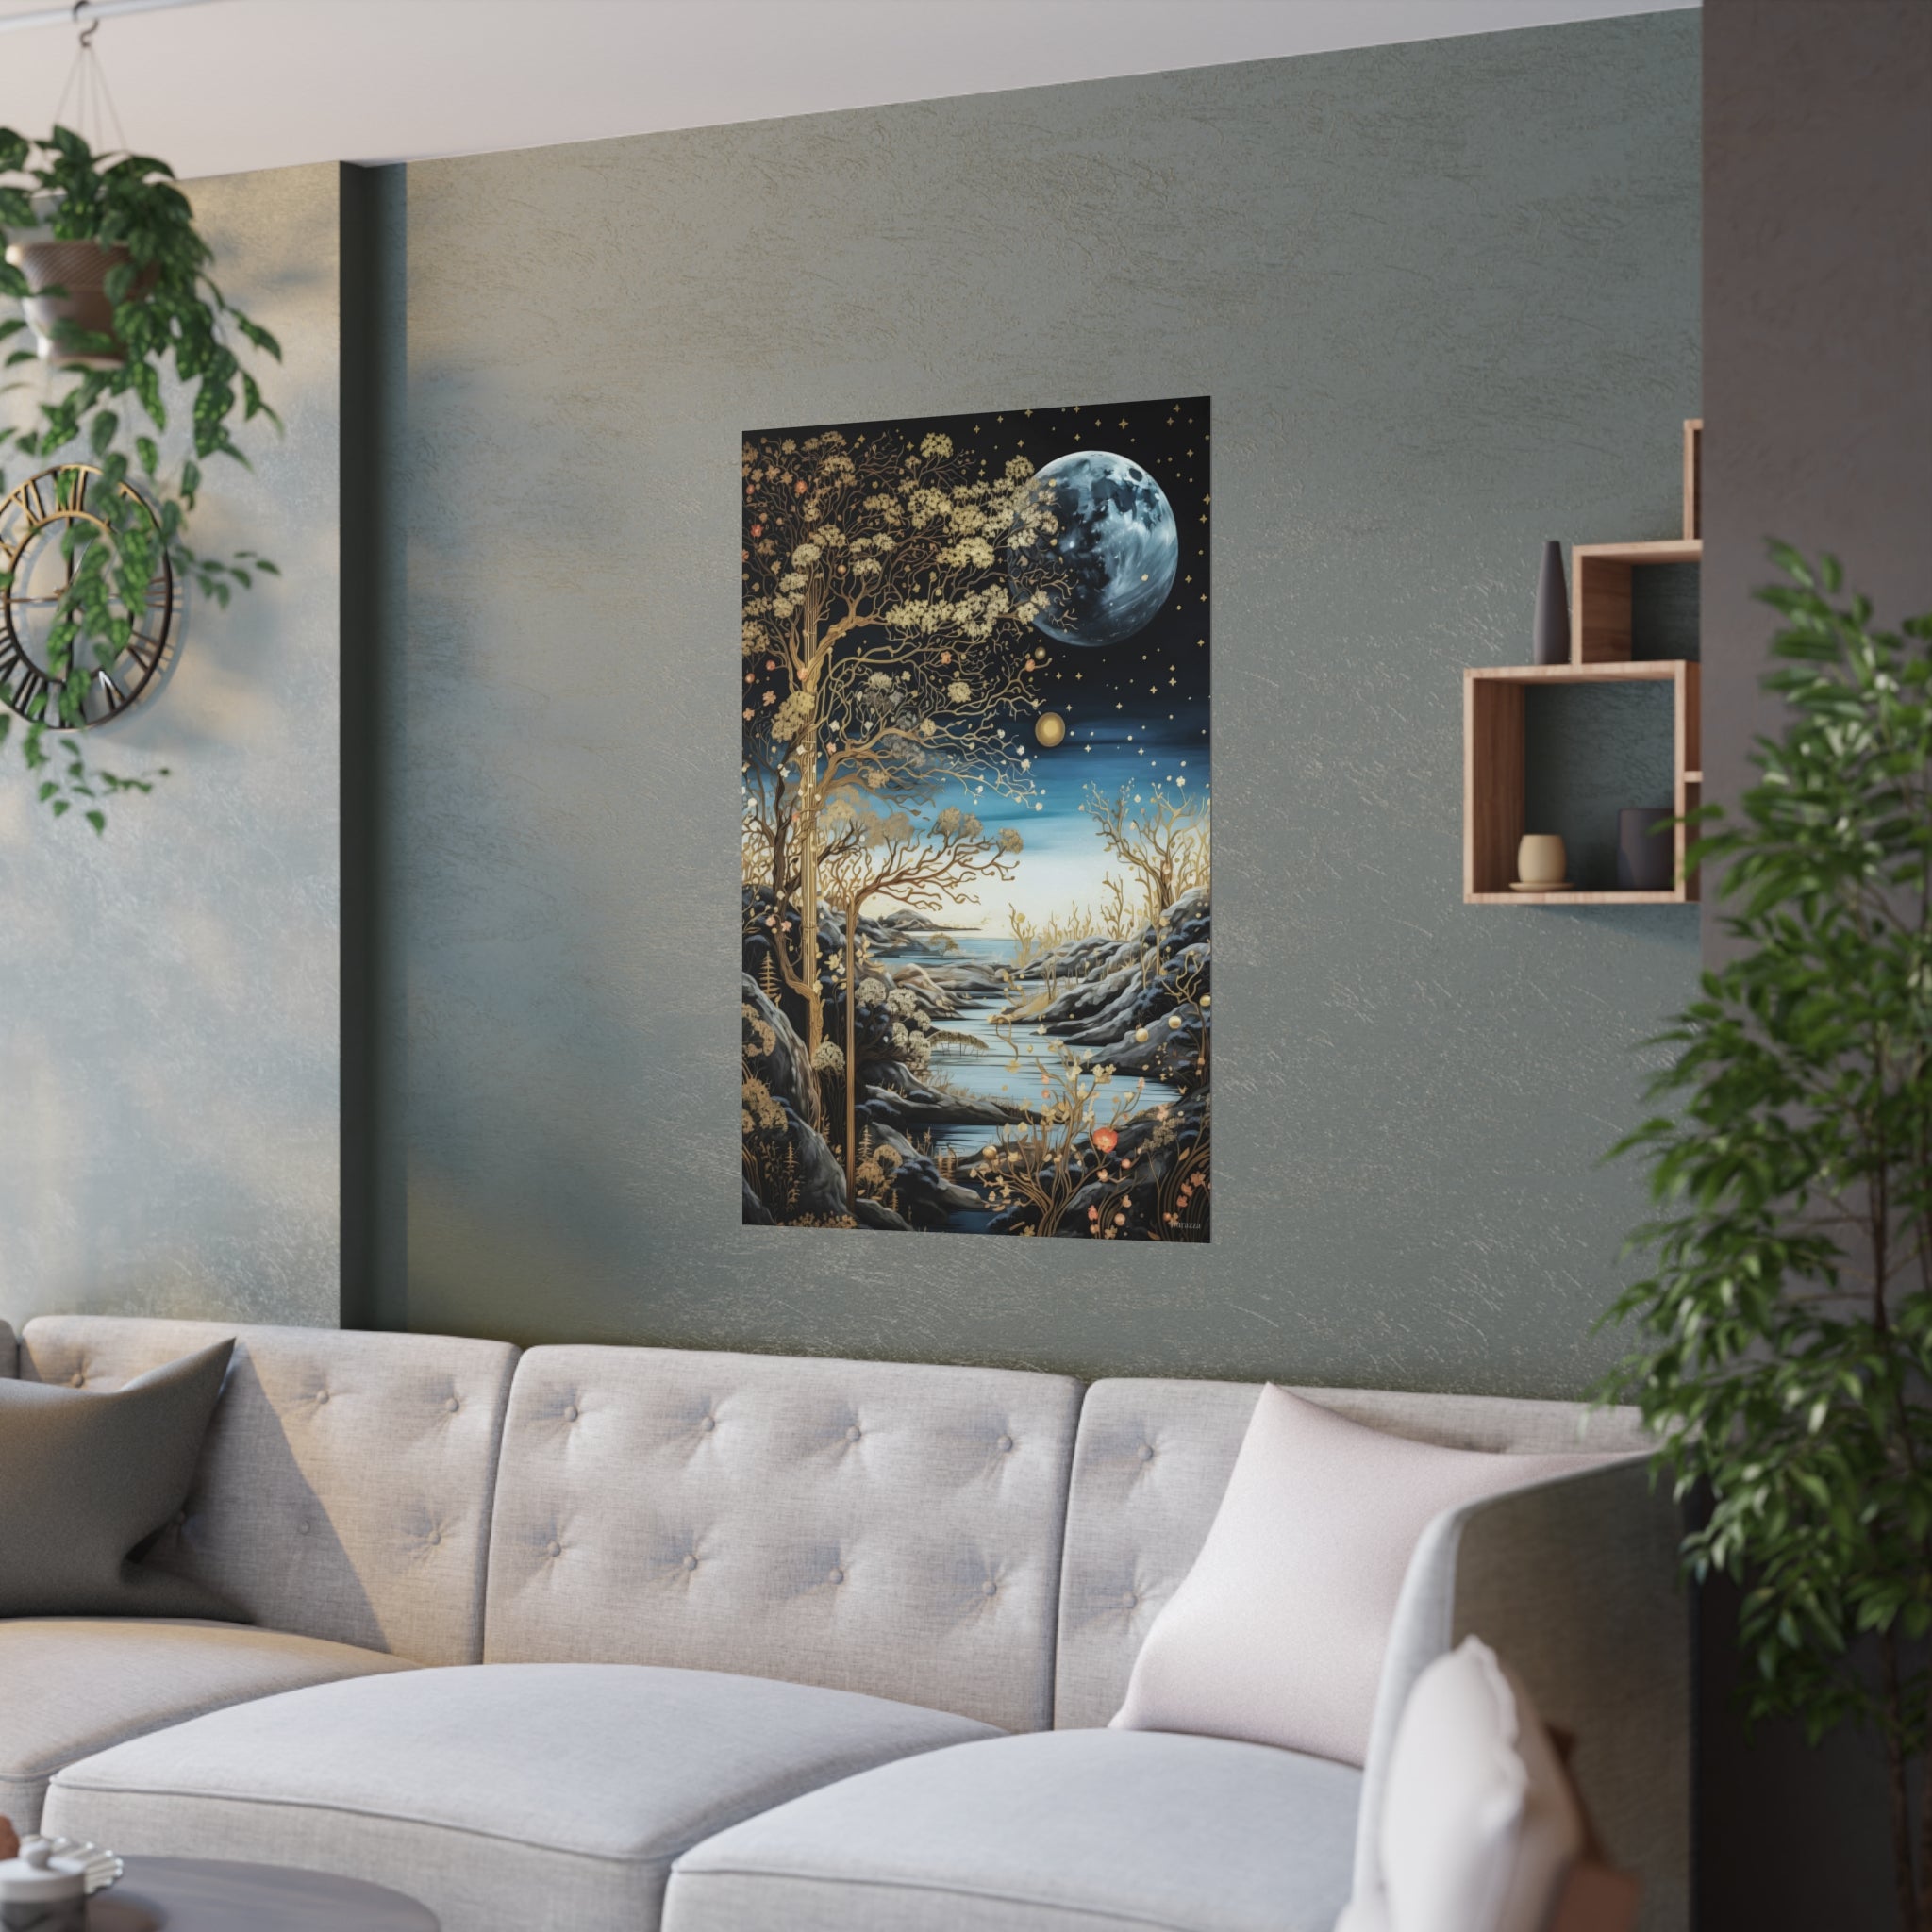 Starlit Bloom Wall Art: Surreal Dreamscape Painting